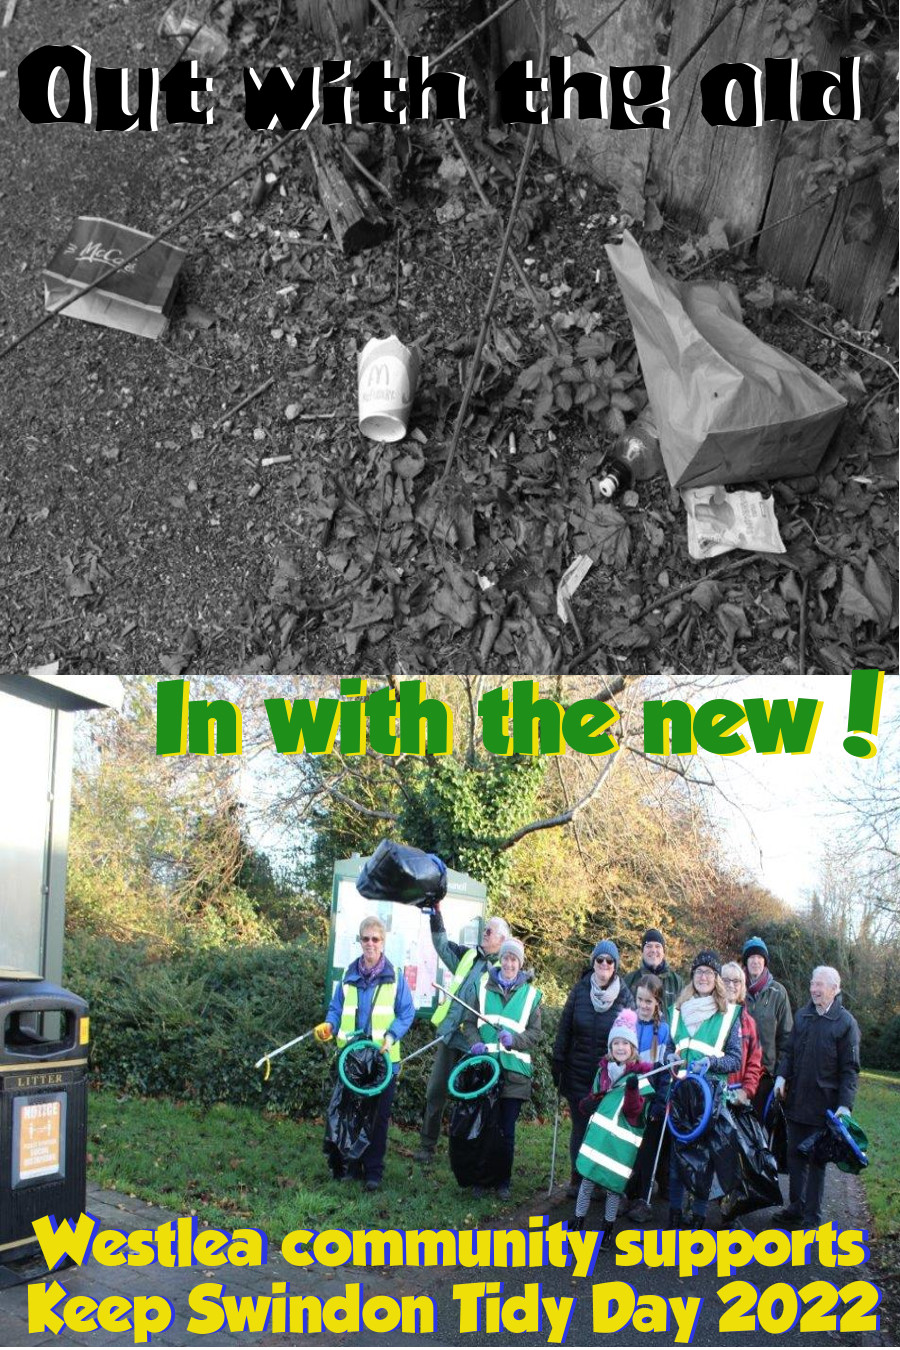 Reads, 'Out with the old, in with the new, KST Day 2022'.  Top half shows heavy littered areas.  Bottom half shows the Acorn Swindon campaign poster which reads, 'We will not let this slide, take back our Oasis.'  It also shows a group of litter pickers and their collected rubbish in a skate park.